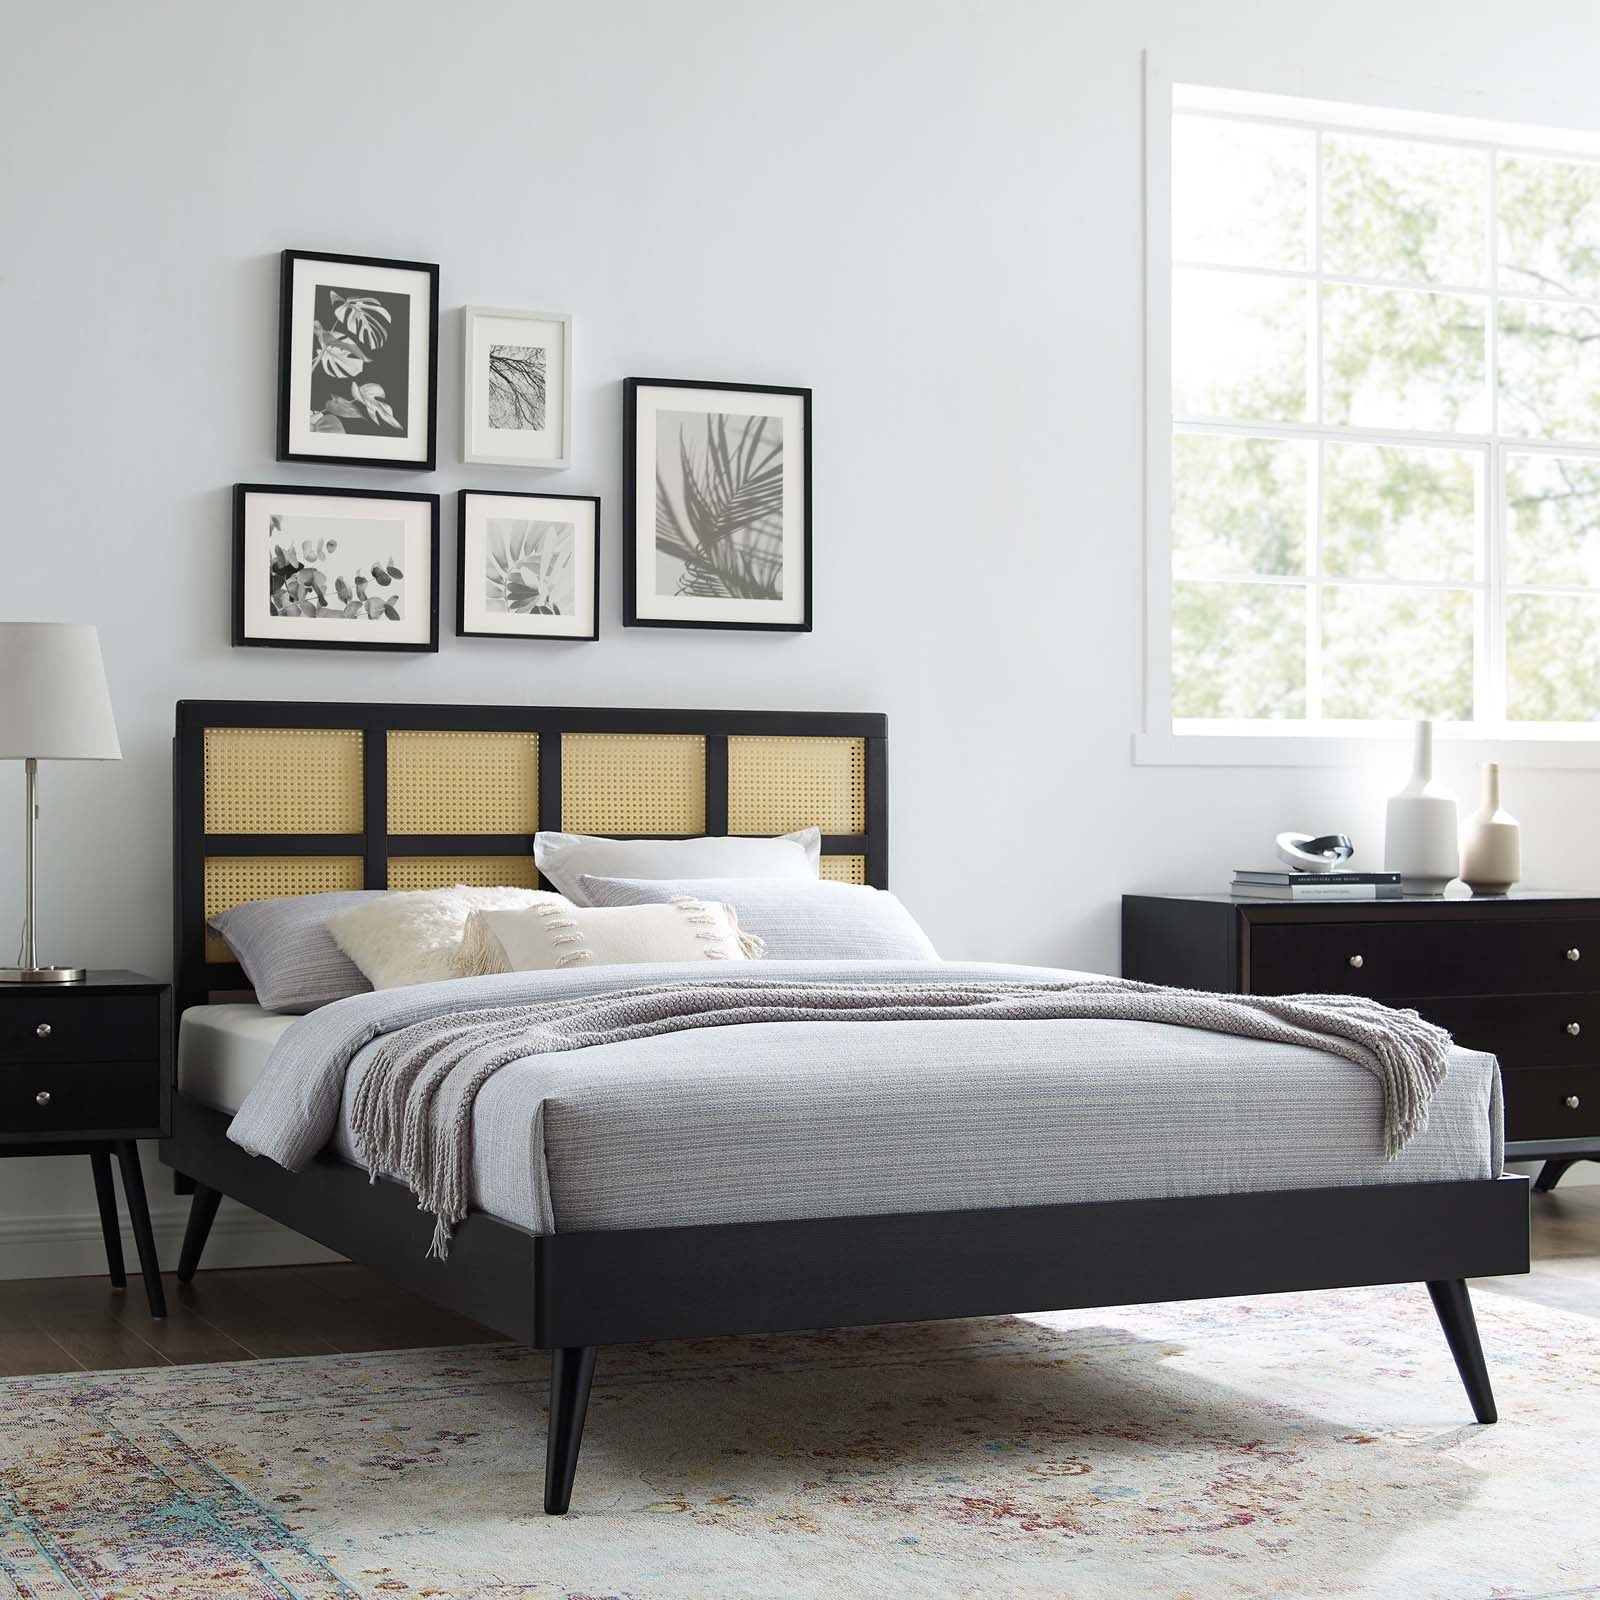 Sidney Cane and Wood Full Platform Bed With Splayed Legs - East Shore Modern Home Furnishings